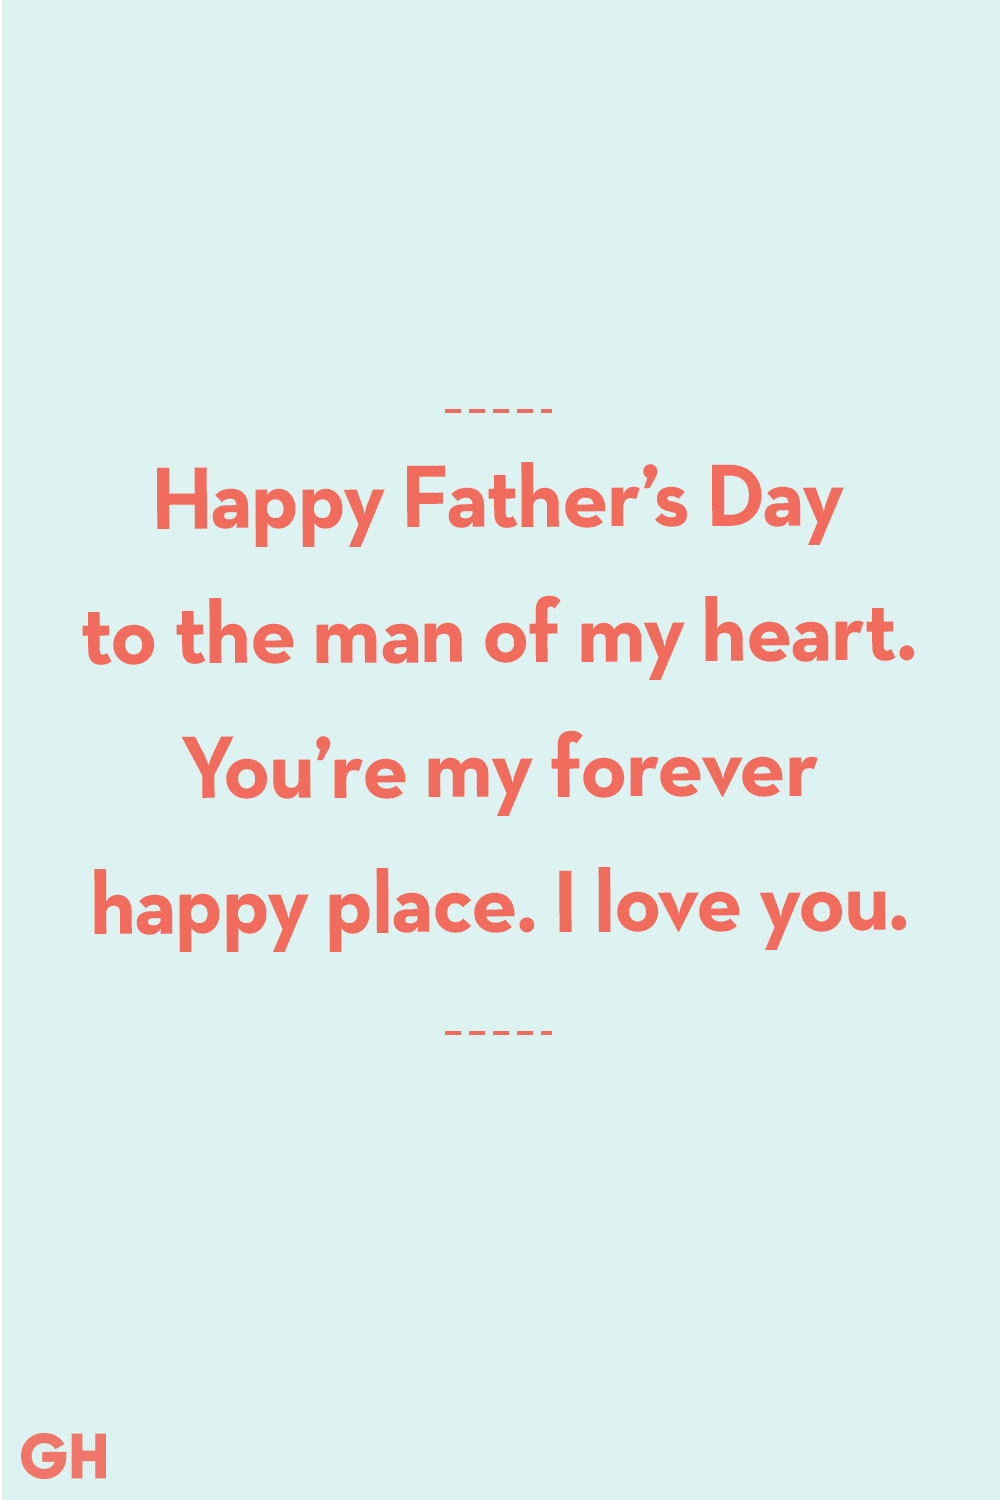 Happy Fathers Day Wishes and Quotes for Dad